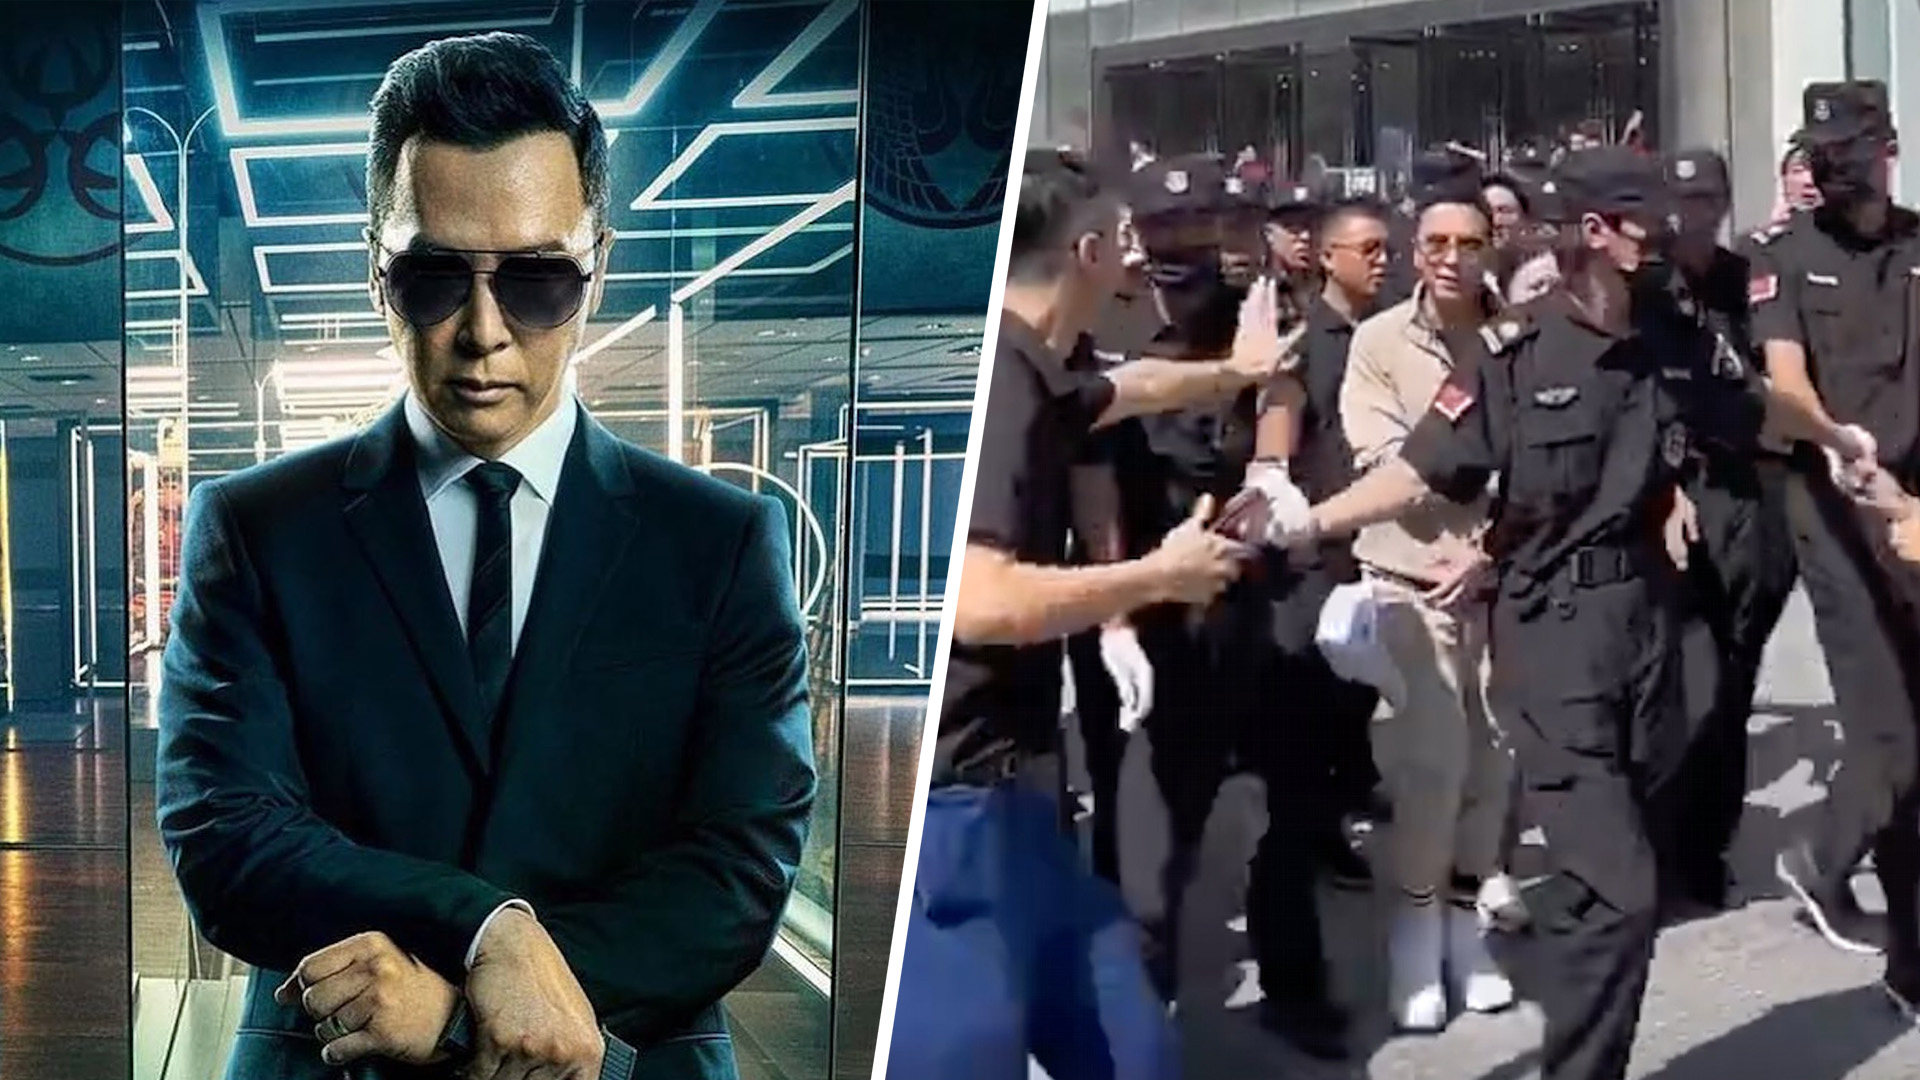 Hong Kong action film star, Donnie Yen, has faced angry criticism on mainland social media for heavy-handed security which surrounded him at an event in China. Photo: SCMP composite/Weibo/Instagram